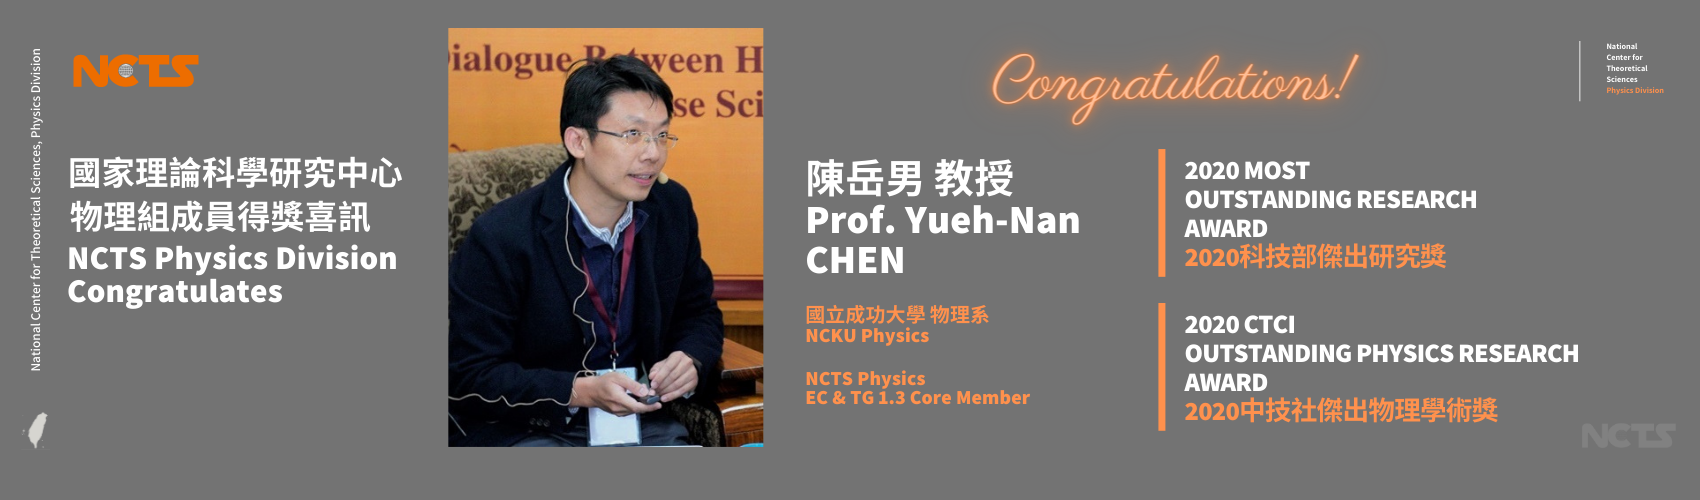 NCTS Congratulates Prof. Yueh-Nan Chen on Winning 2020 MOST & CTCI Awards